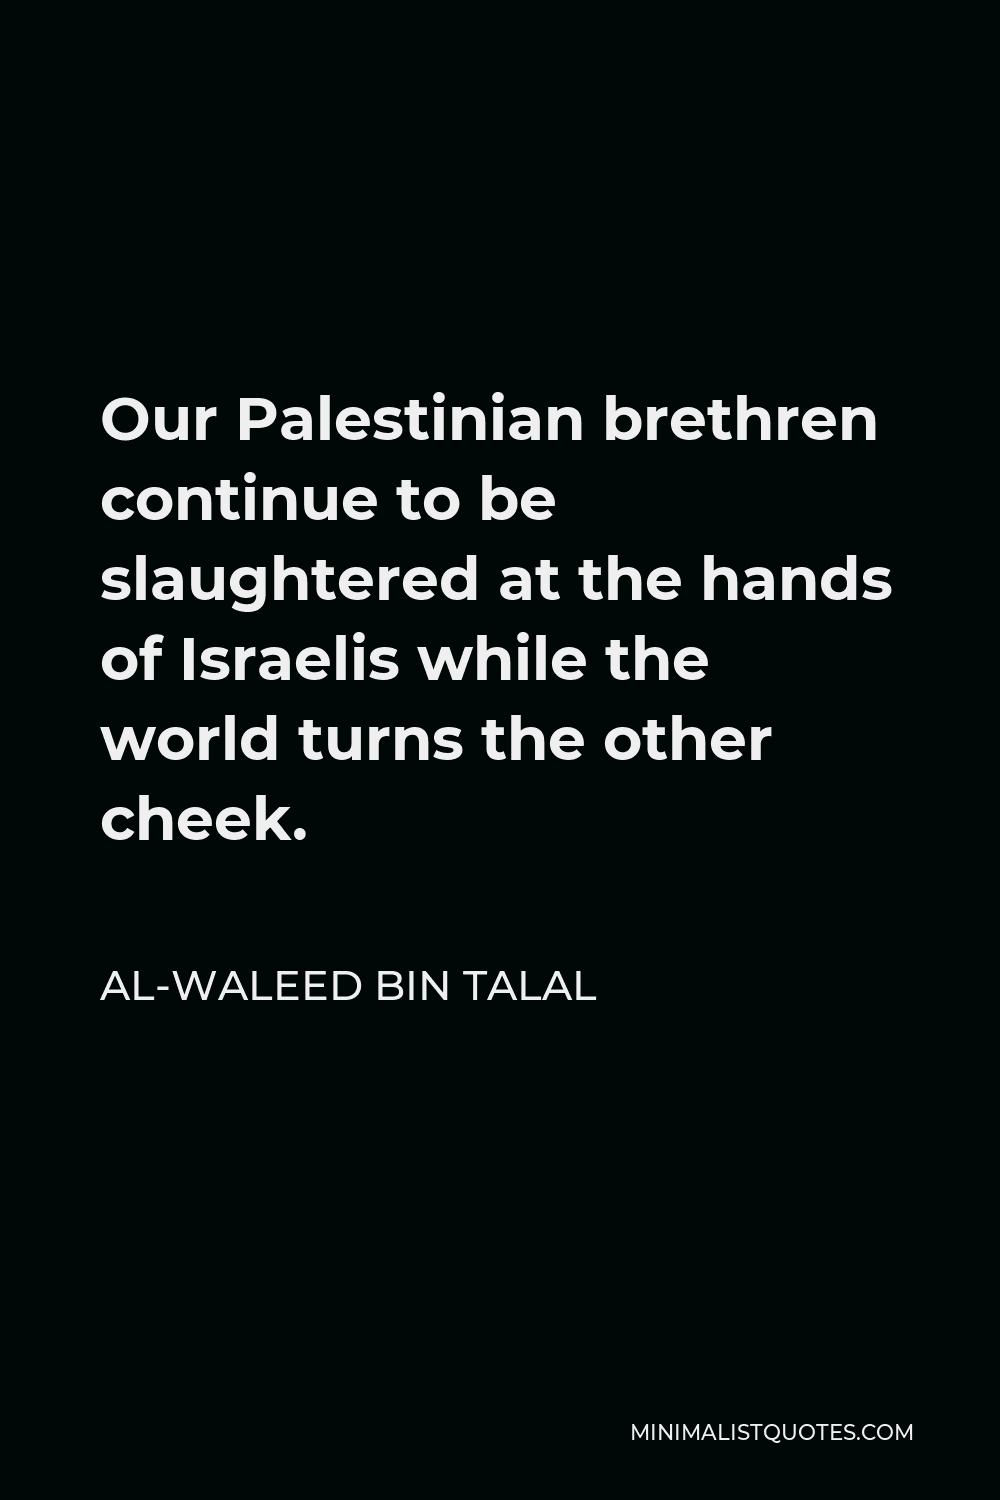 Al-Waleed bin Talal Quote - Our Palestinian brethren continue to be slaughtered at the hands of Israelis while the world turns the other cheek.